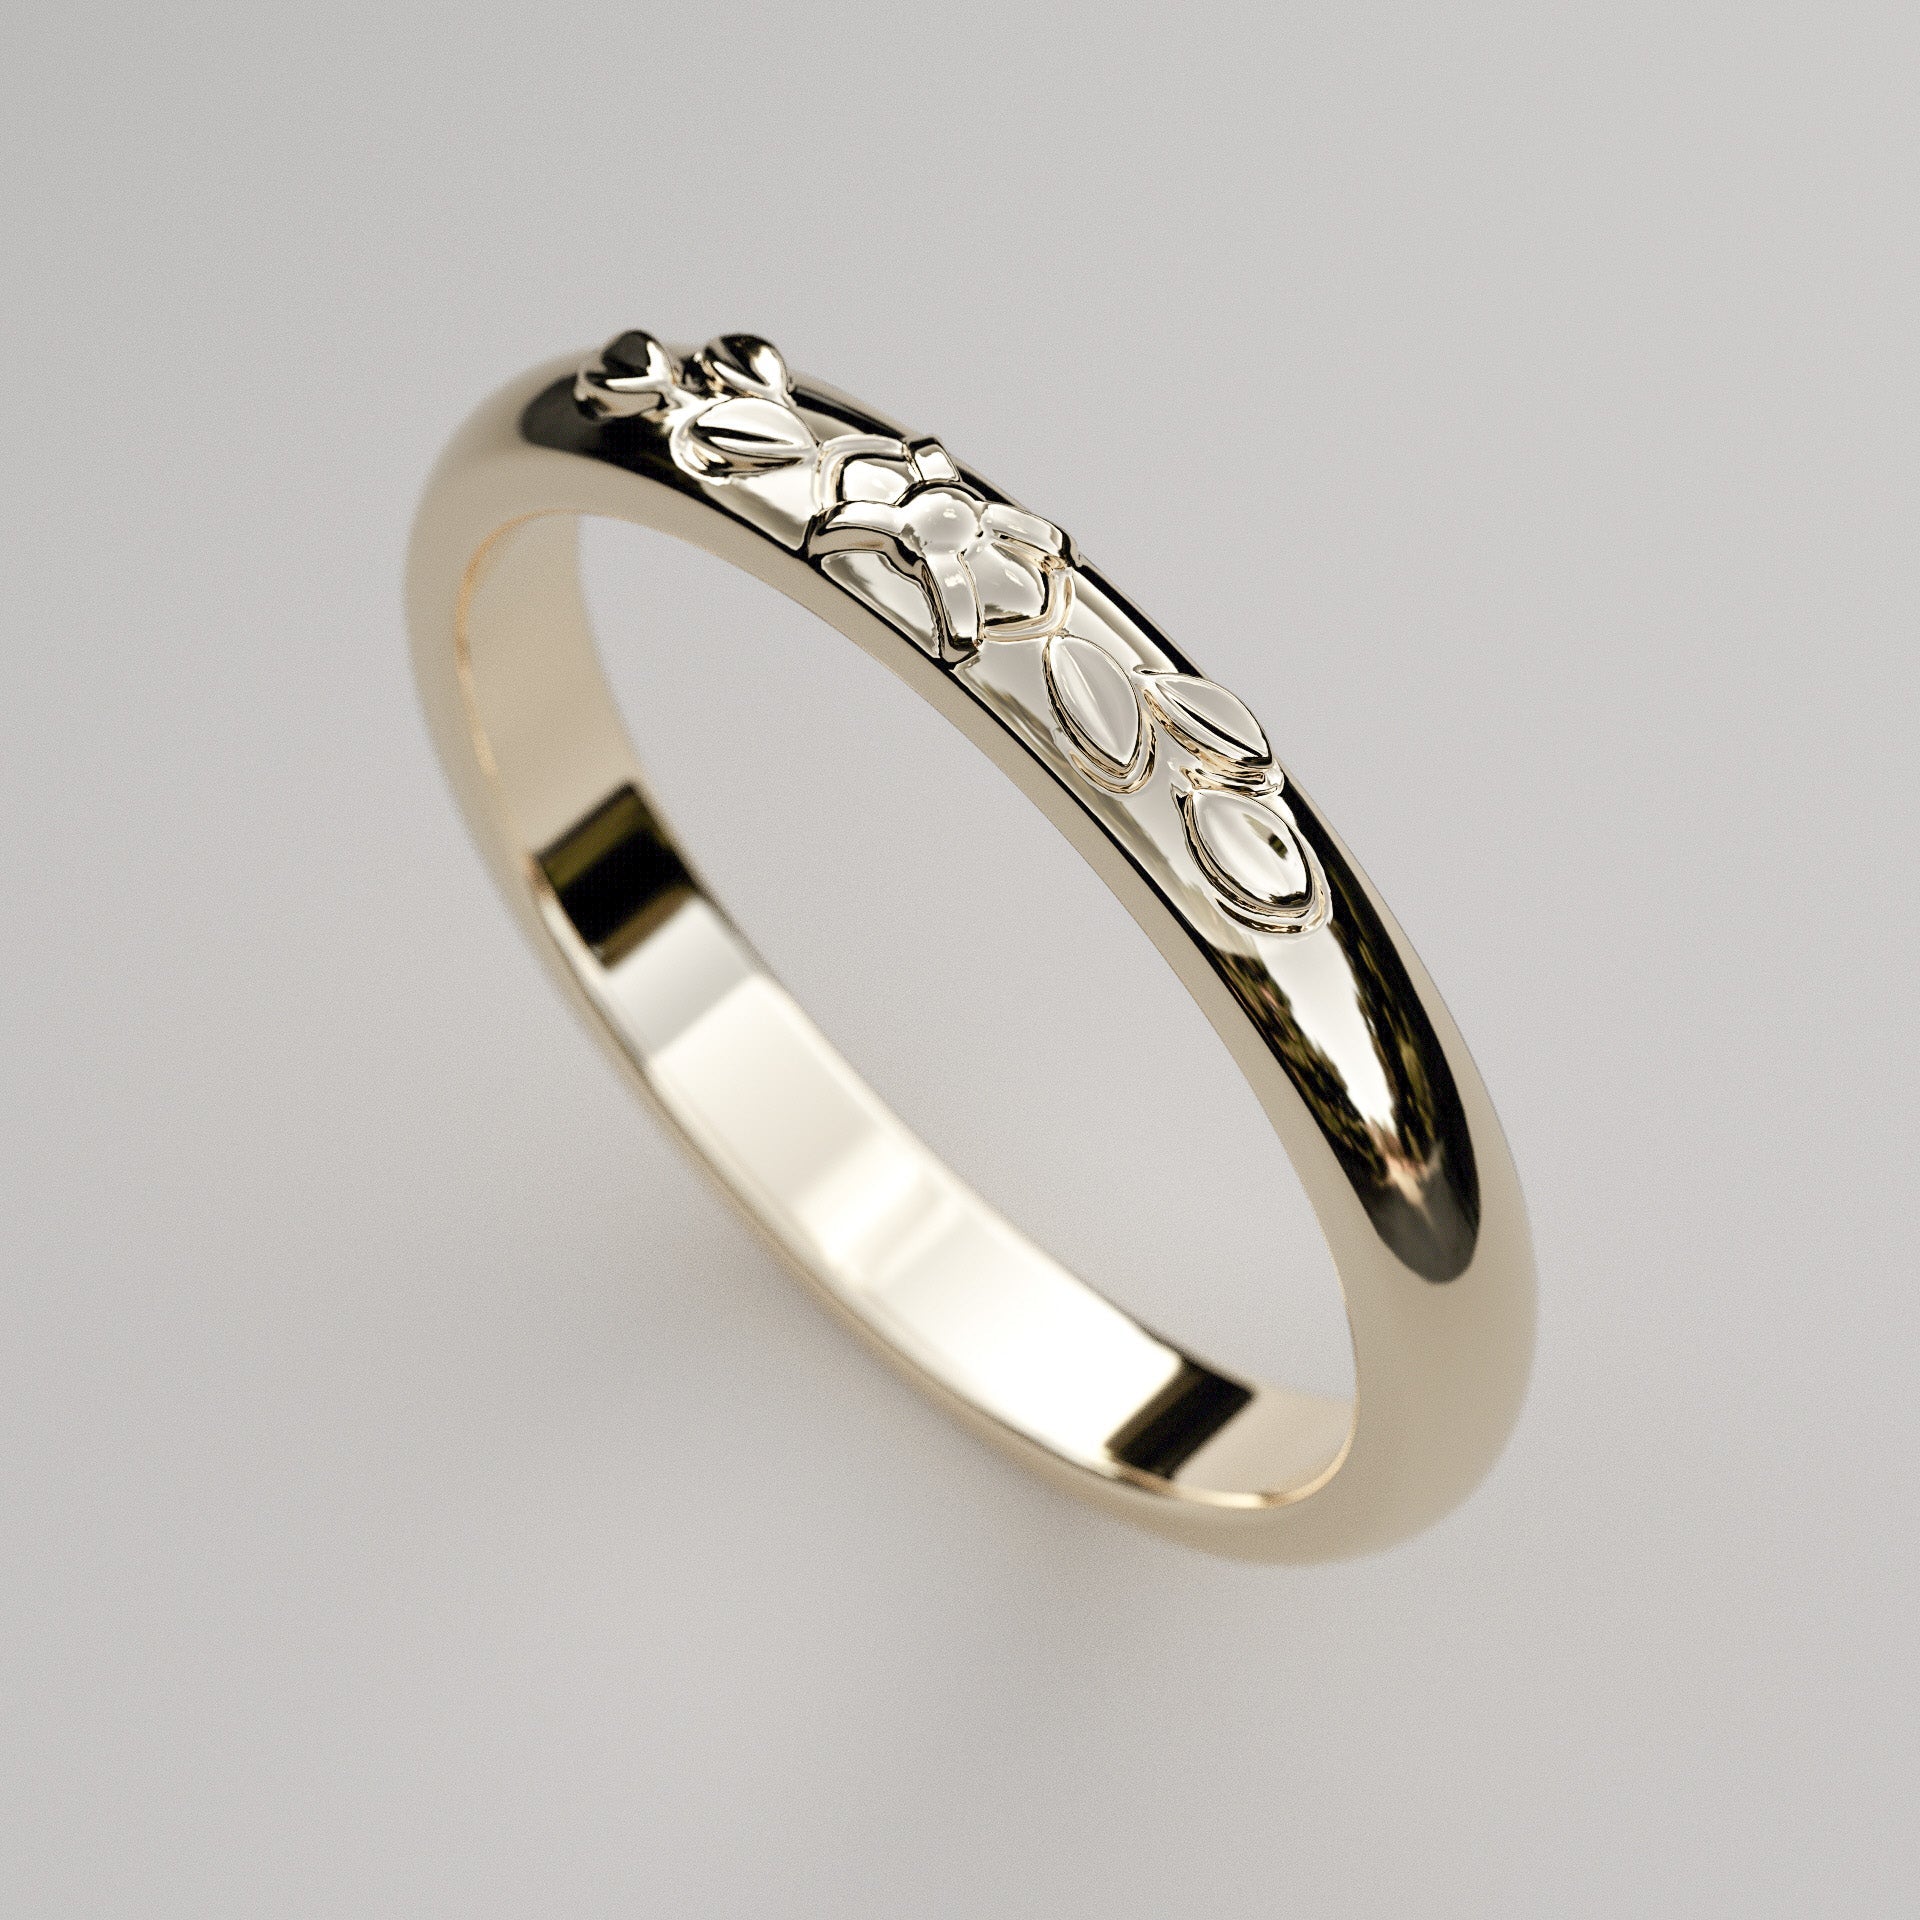 Yellow gold wedding band with leaf design for woman in 14k or 18k gold